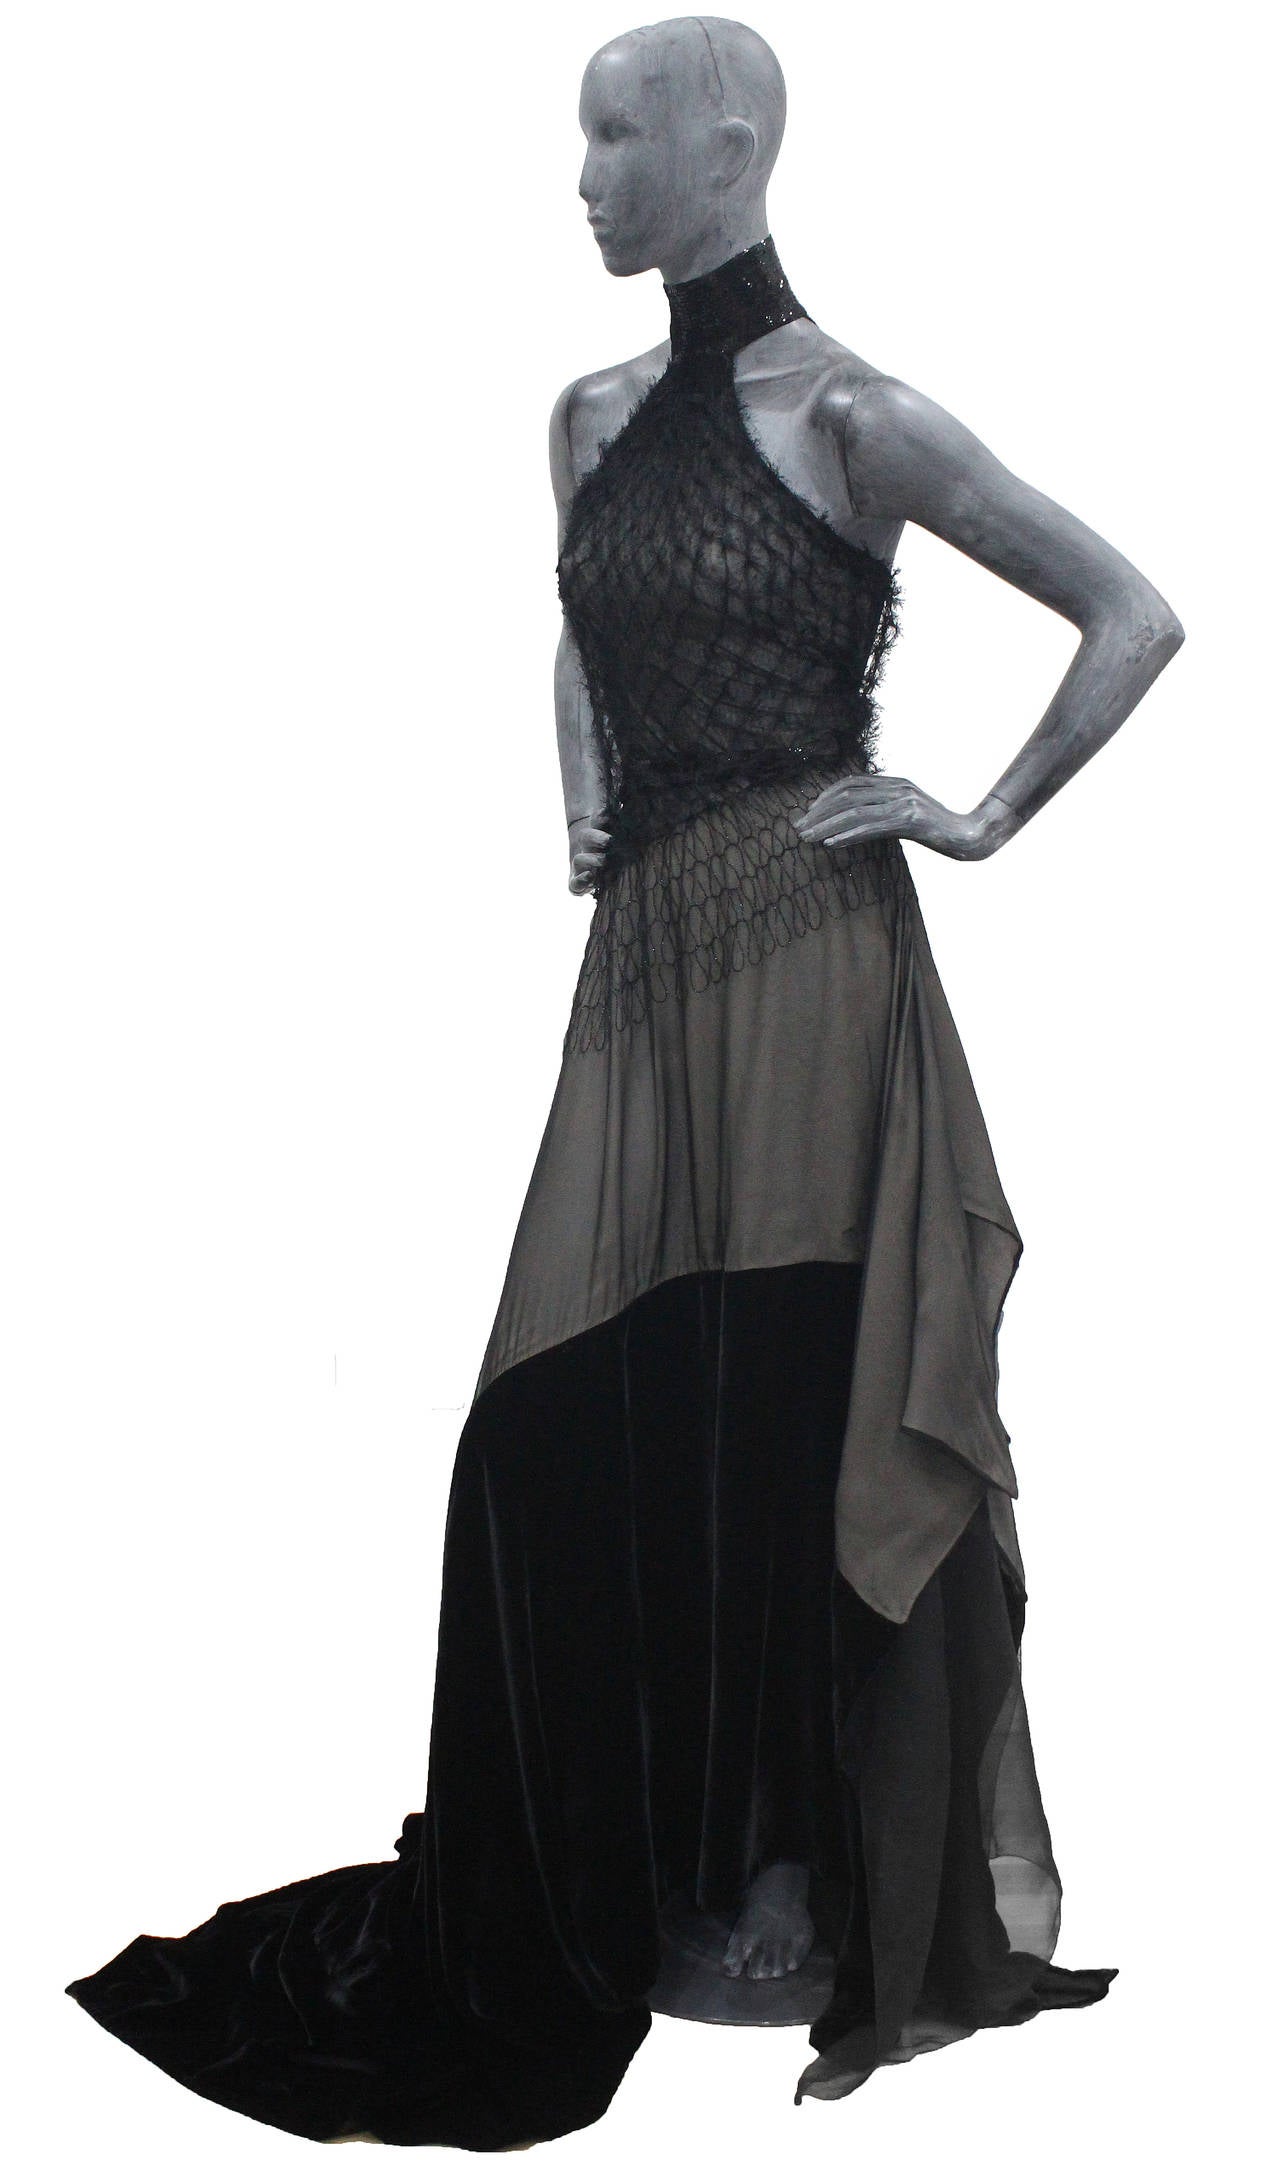 An outstanding evening gown by Gianfranco Ferre. The dress has a sequinned halter neck with a diagonal strap at the rear, netted bodice, open leg slit on the right and a long black velvet train. 

Size XS - SMALL / FR  34 - 36 / UK 6 - 8 / ITALIAN